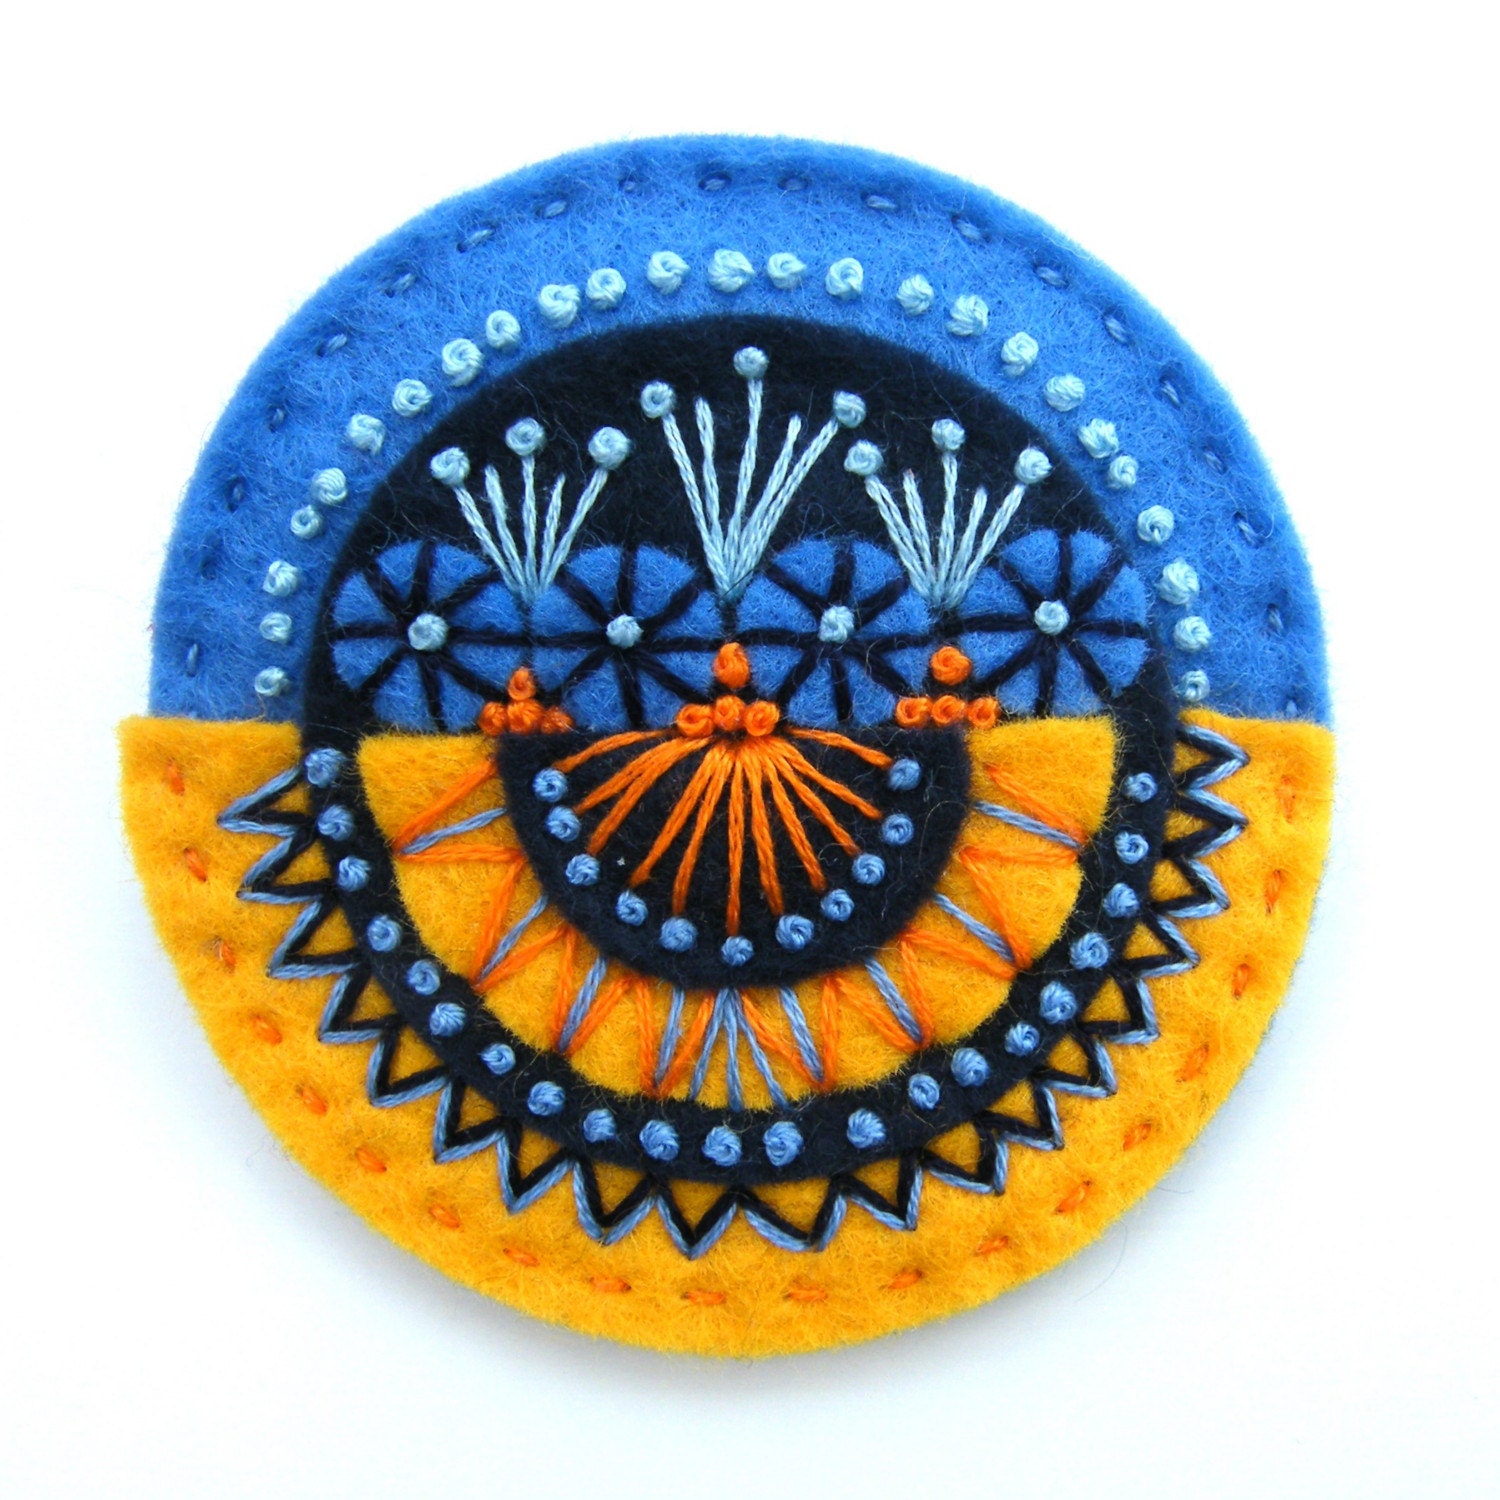 AZTEC FELT BROOCH WITH FREEFORM EMBROIDERY